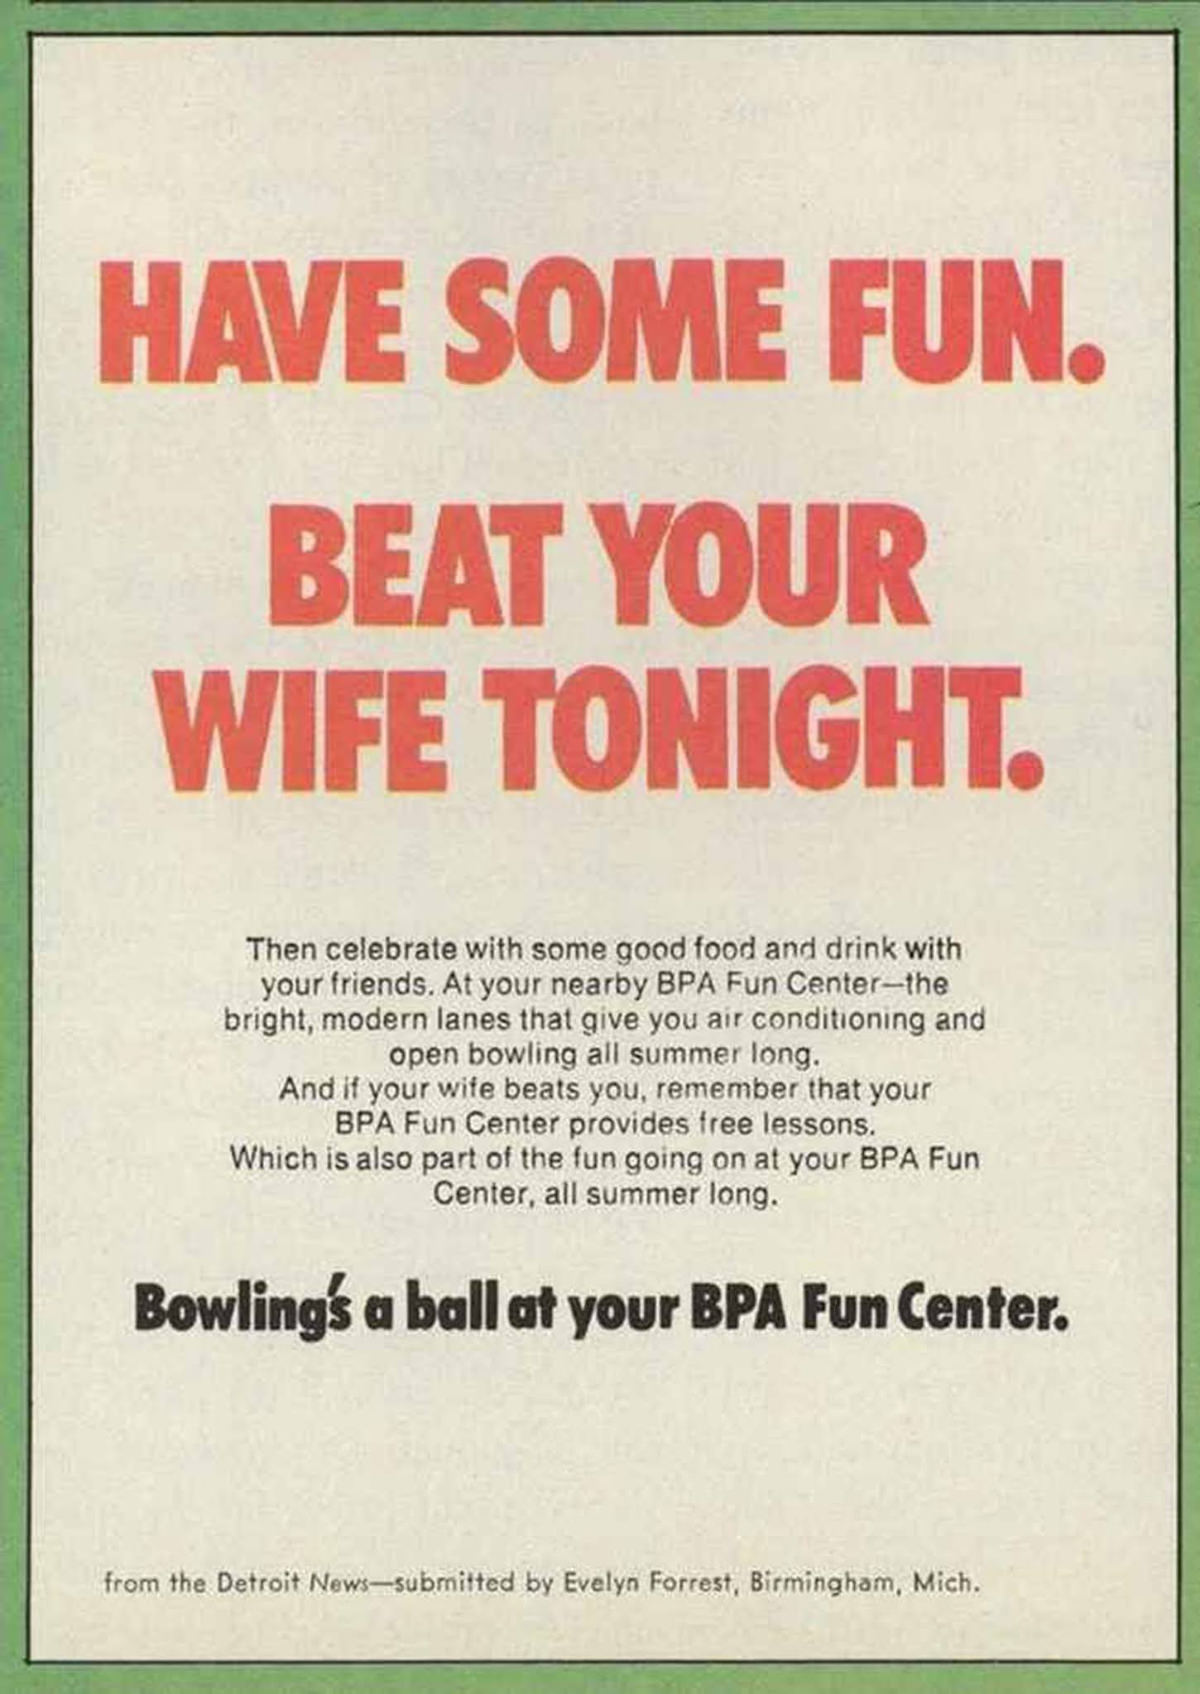 Have Some Fun, Beat Your Wife Tonight: Vintage BPA Fun Center ads from the 1960s